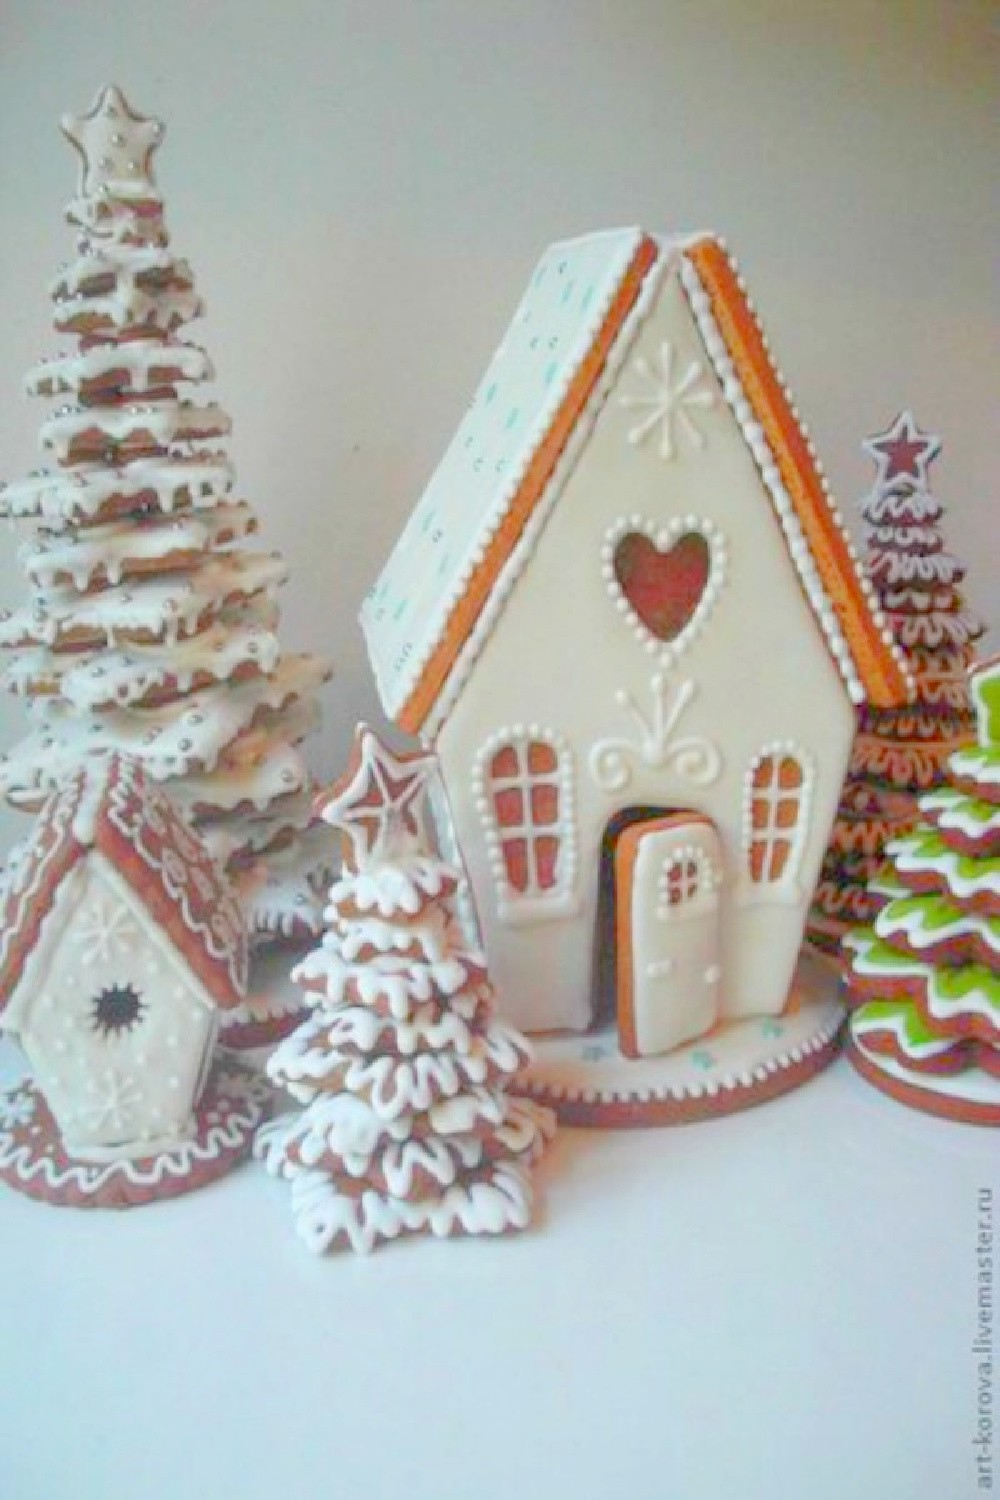 Magnificent white gingerbread house cottage with trees and snow - Art-korova. #gingerbreadhouse #whitechristmas #diy #baking